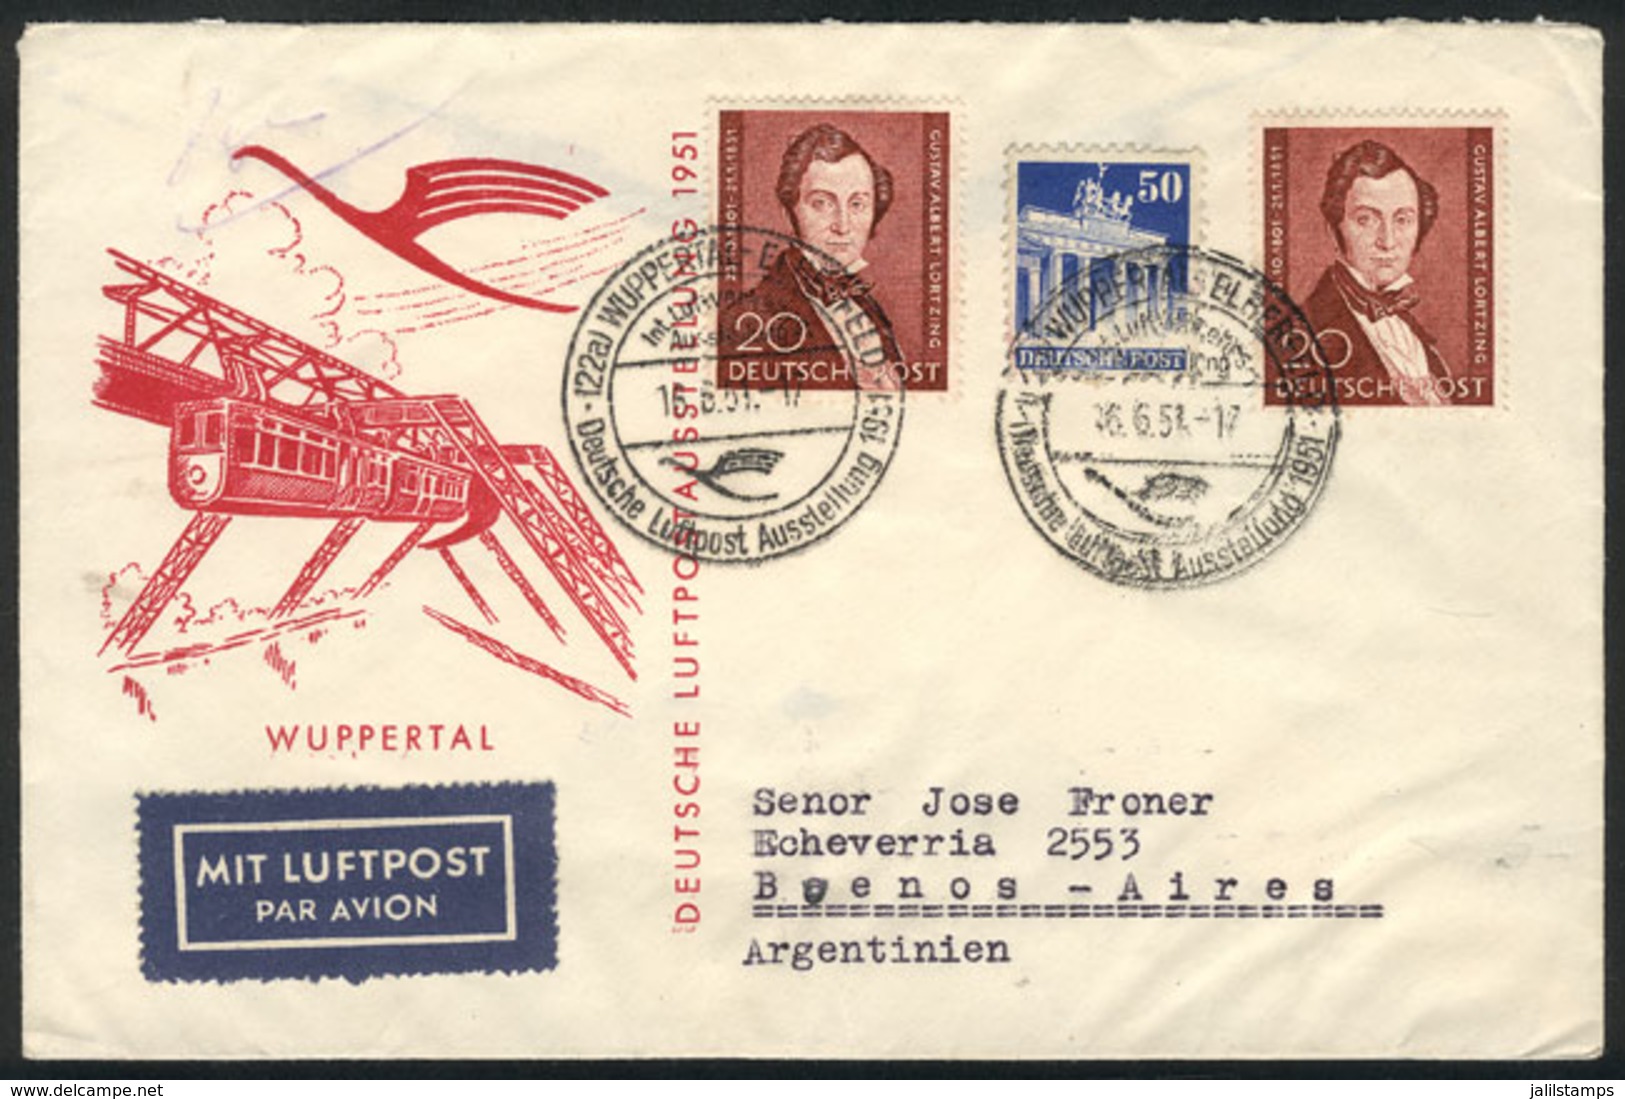 WEST GERMANY: Airmail Cover Sent To Argentina On 16/JUN/1951 With Very Good Postage, Excellent Quality! - Covers & Documents